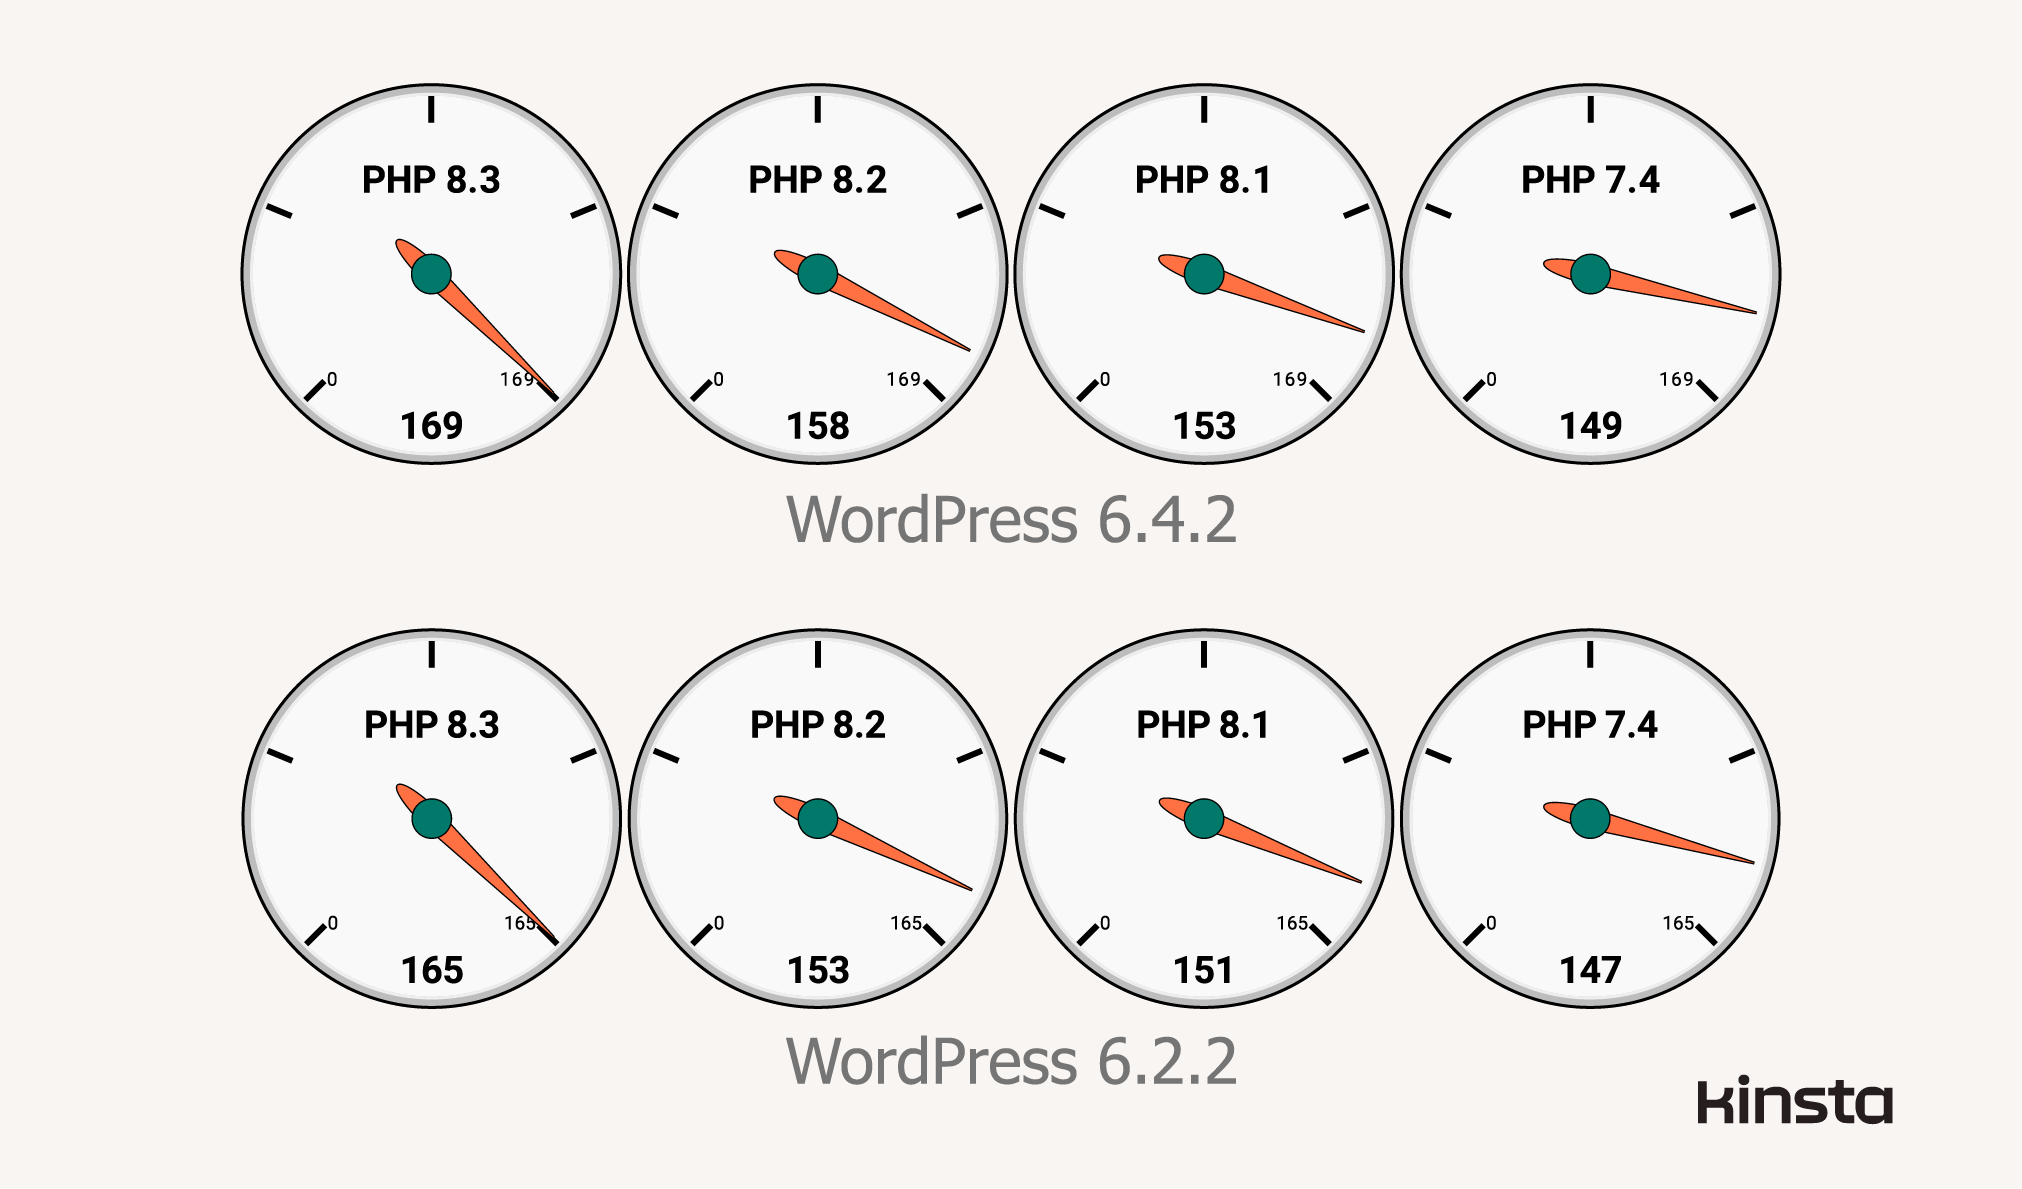 WordPress 6.2.2 performance on PHP 7.4, 8.1, 8.2, and 8.3 (in requests/second).